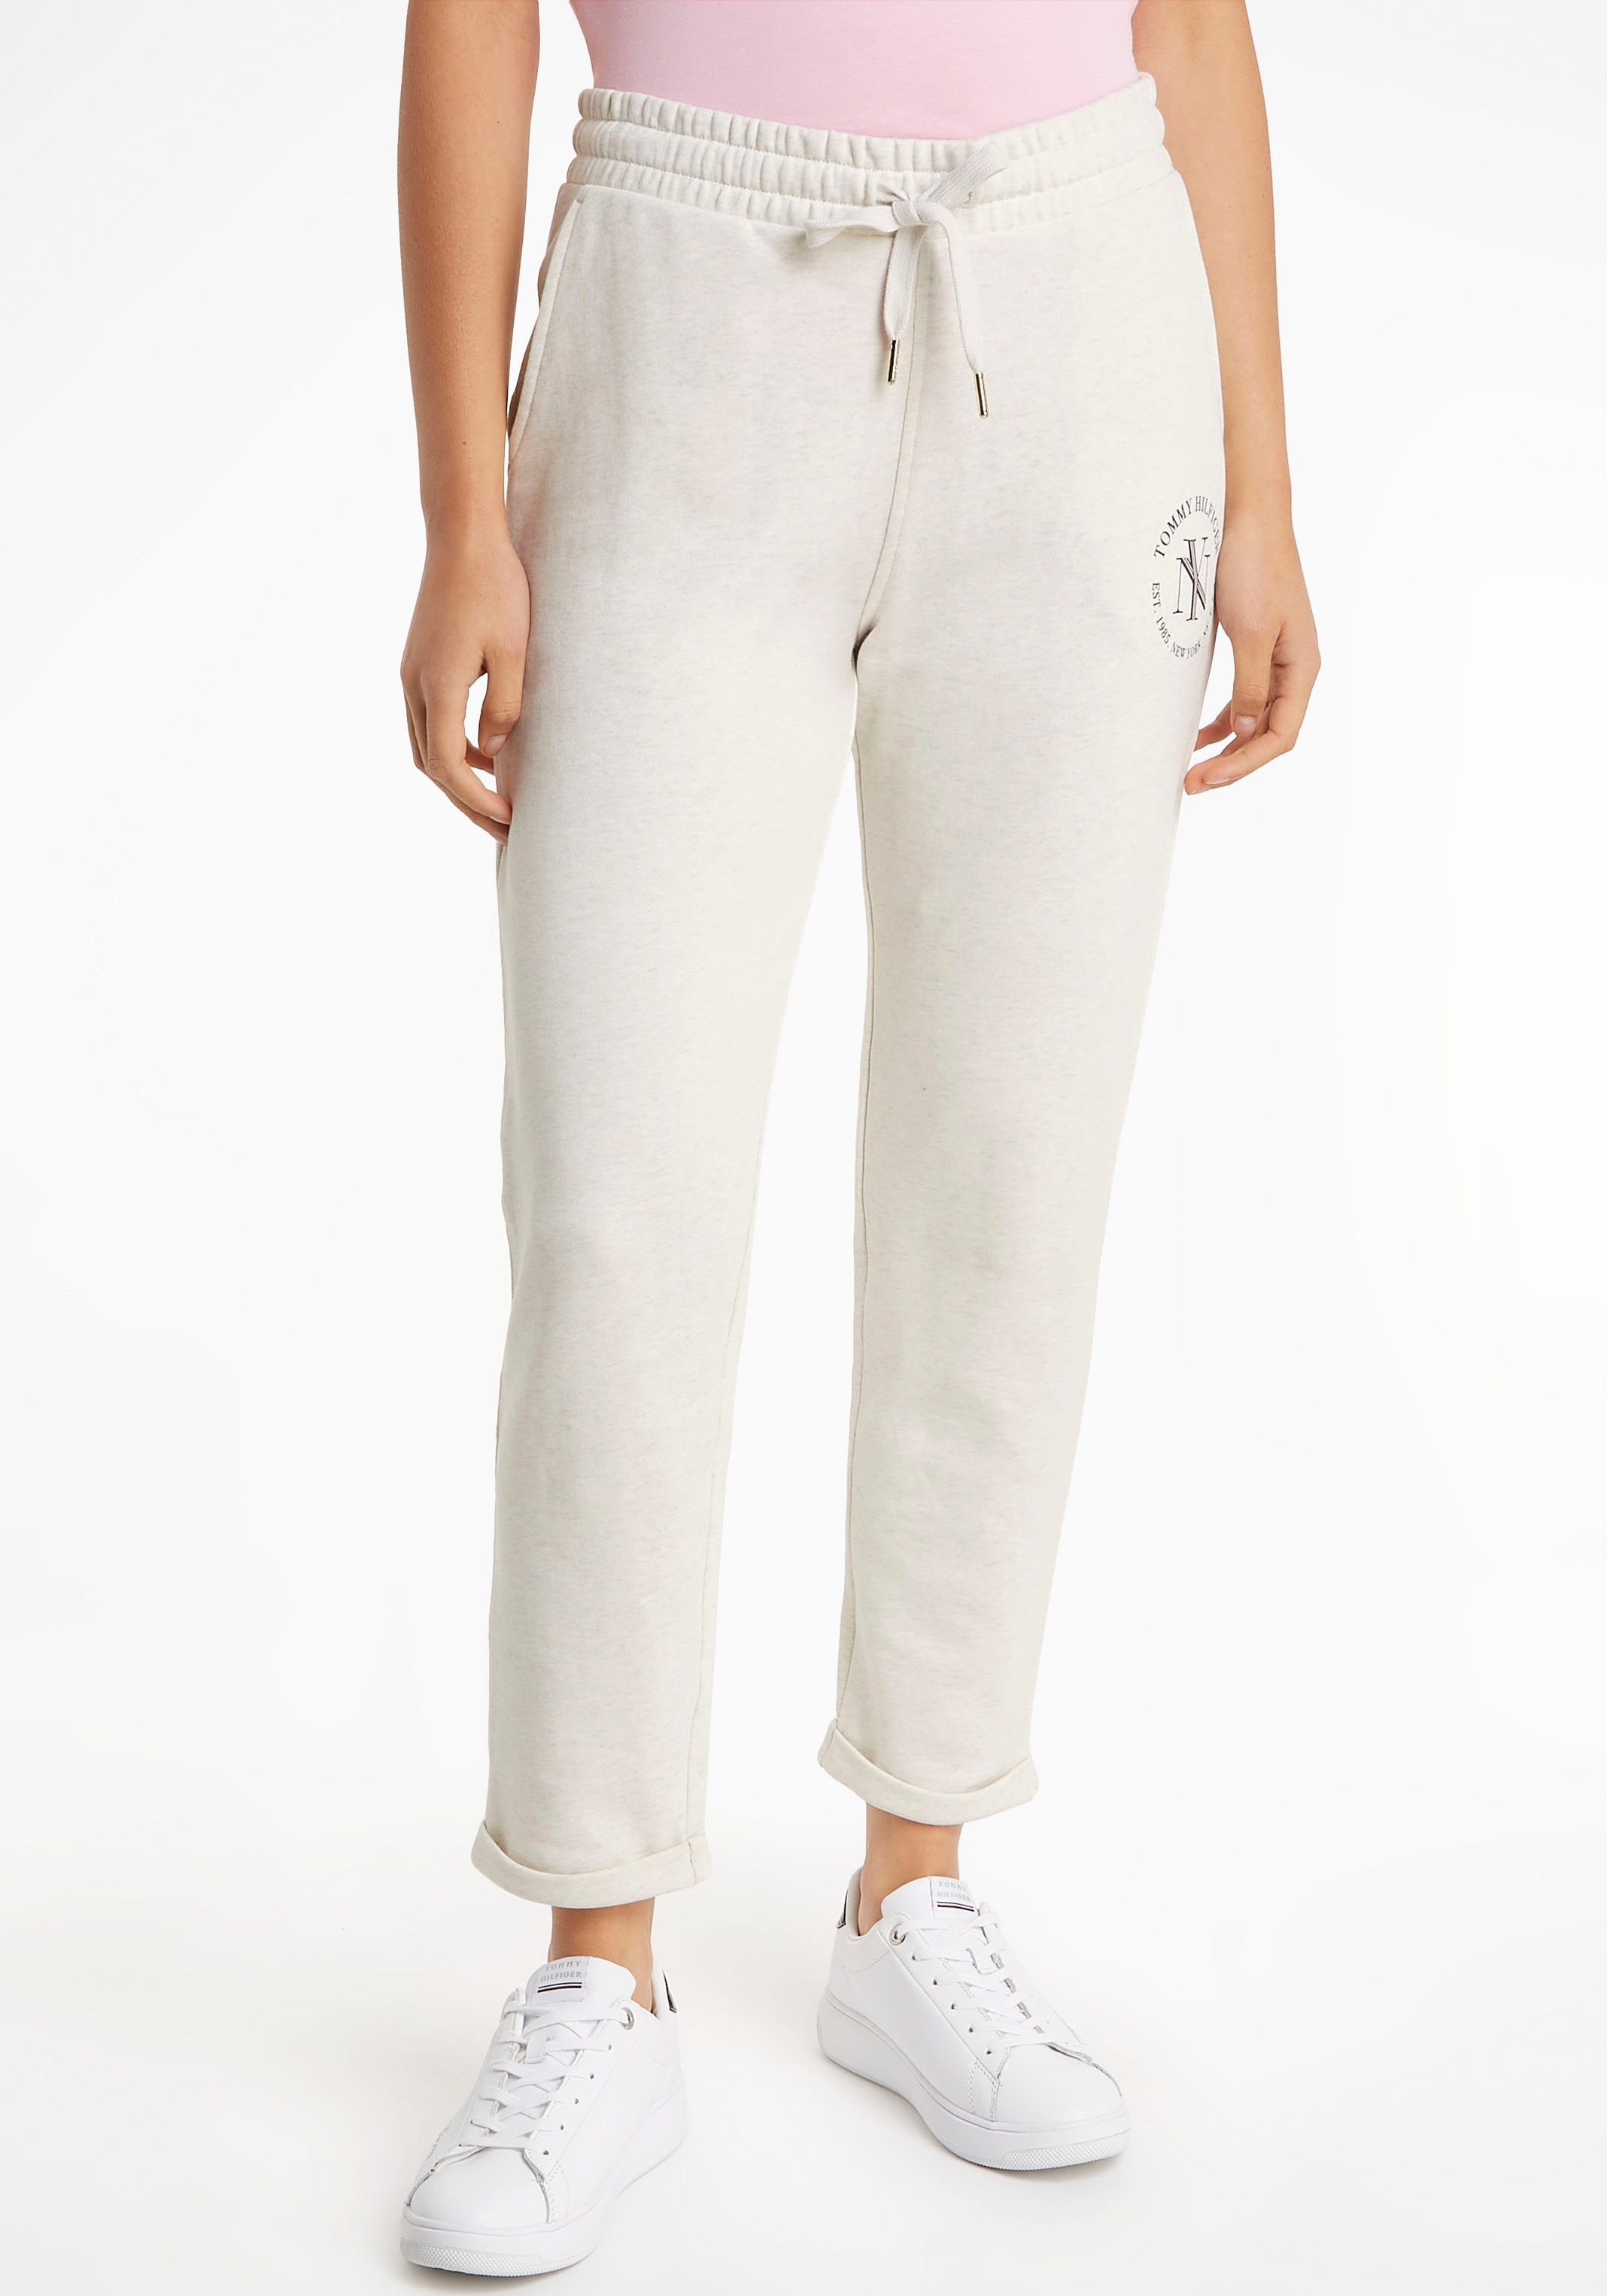 Tommy Hilfiger NYC mit Hilfiger Sweatpants bei ♕ Markenlabel ROUNDALL SWEATPANTS«, Tommy »TAPERED